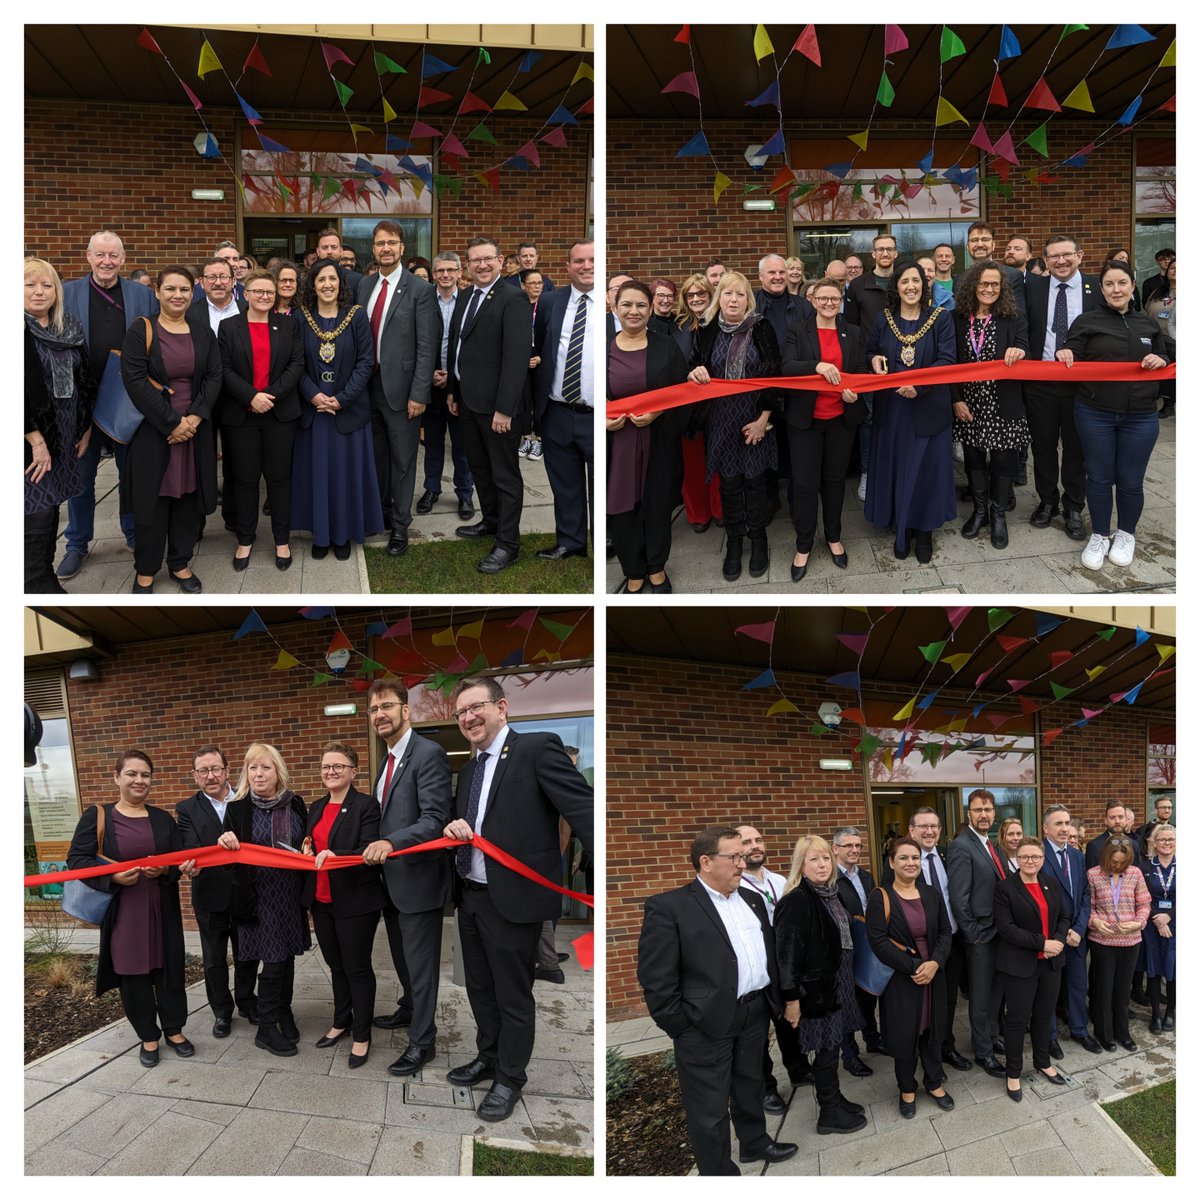 Gorton Hub official opening event, what a fantastic day & great to have all partners participate at the ribbon cutting 🎀✂️🎈🍰 @CllrJulieReid @TheAces @gogreenmcr @OneMcr @GortonLevensINT @MancLibraries @JohnHughes55 @AfzalKhanMCR @GwynneMP @JCPinManchester @morgansindallc